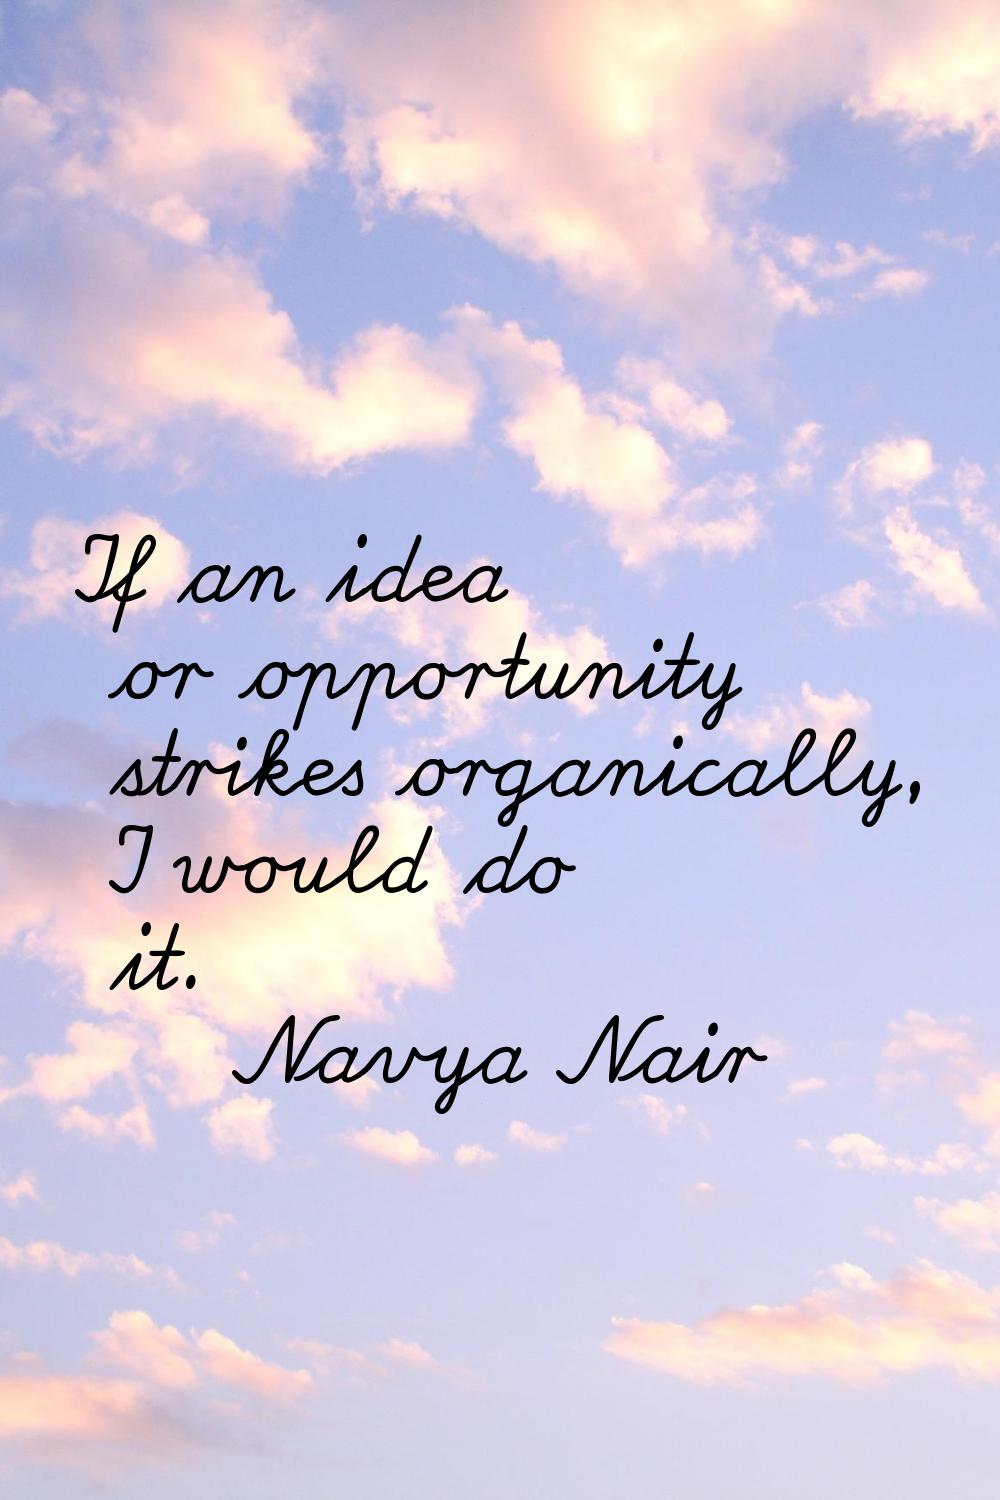 If an idea or opportunity strikes organically, I would do it.